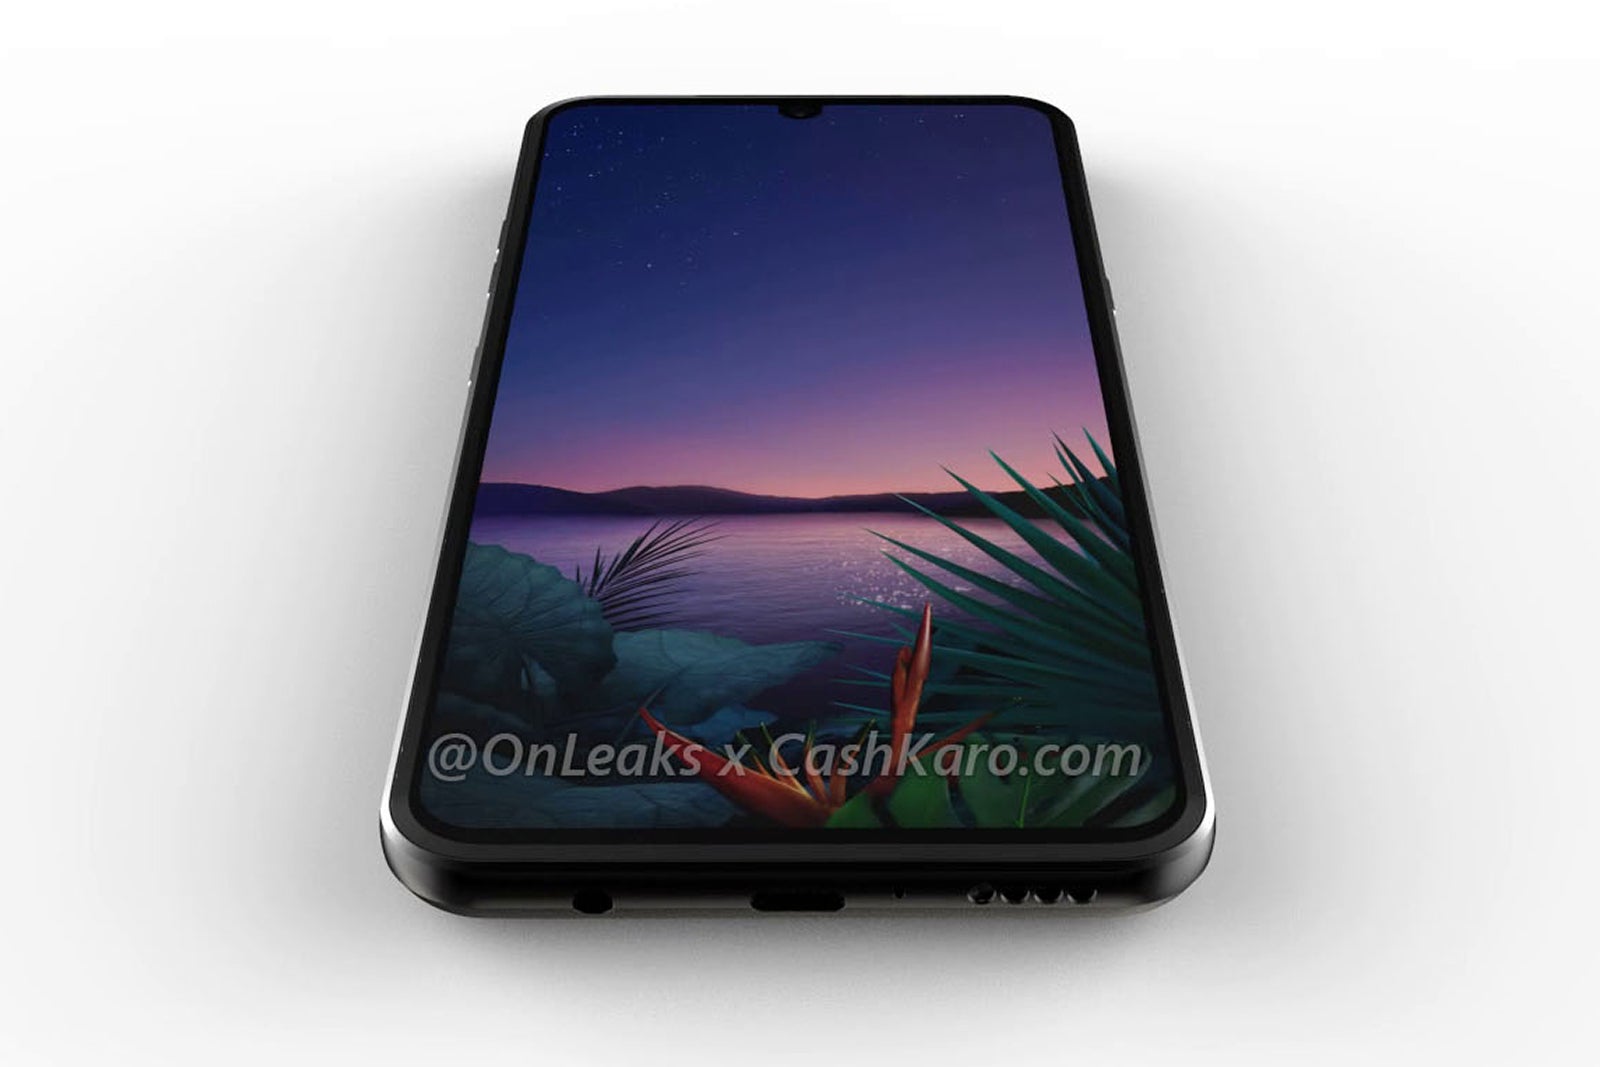 LG G9 ThinQ: Price, release date, news, and rumors